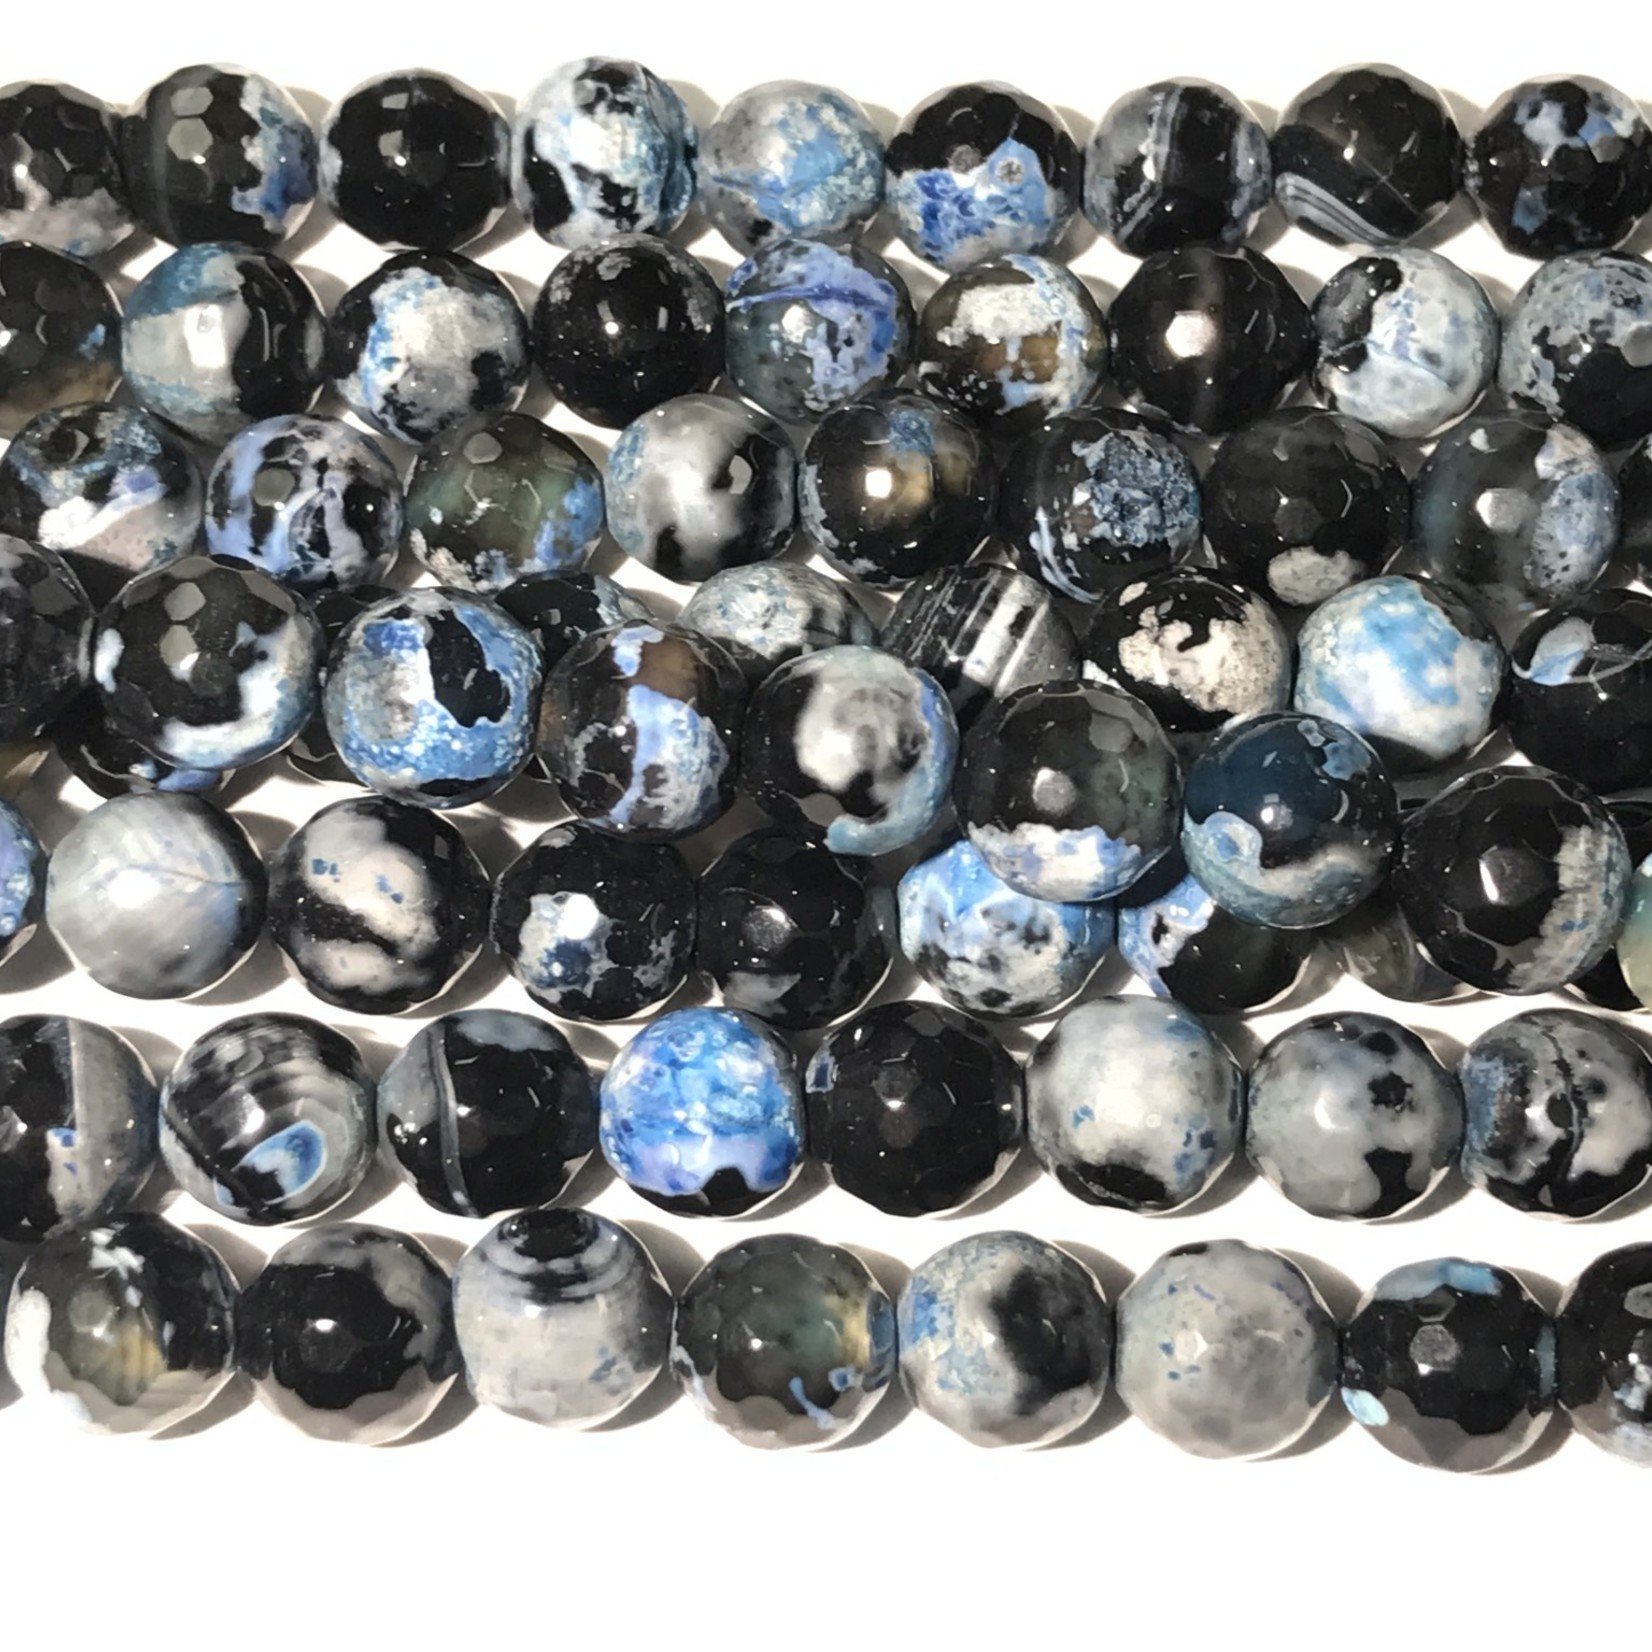 AGATE Faceted Beads Black/Blue 10mm